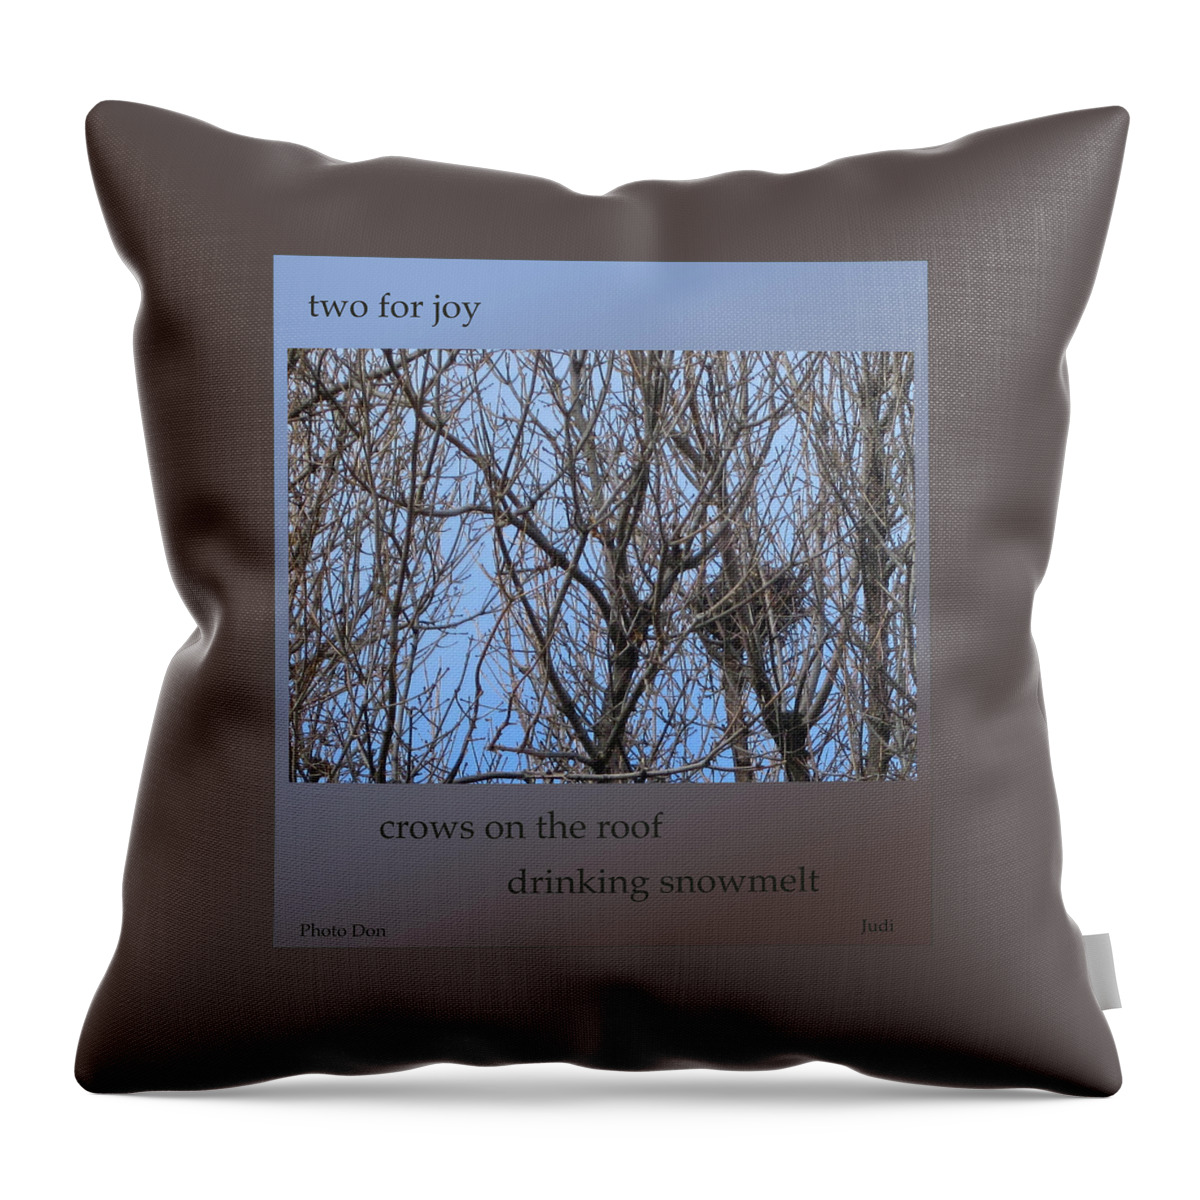 Poetry Throw Pillow featuring the digital art Two for Joy Spring Haiga by Judi and Don Hall